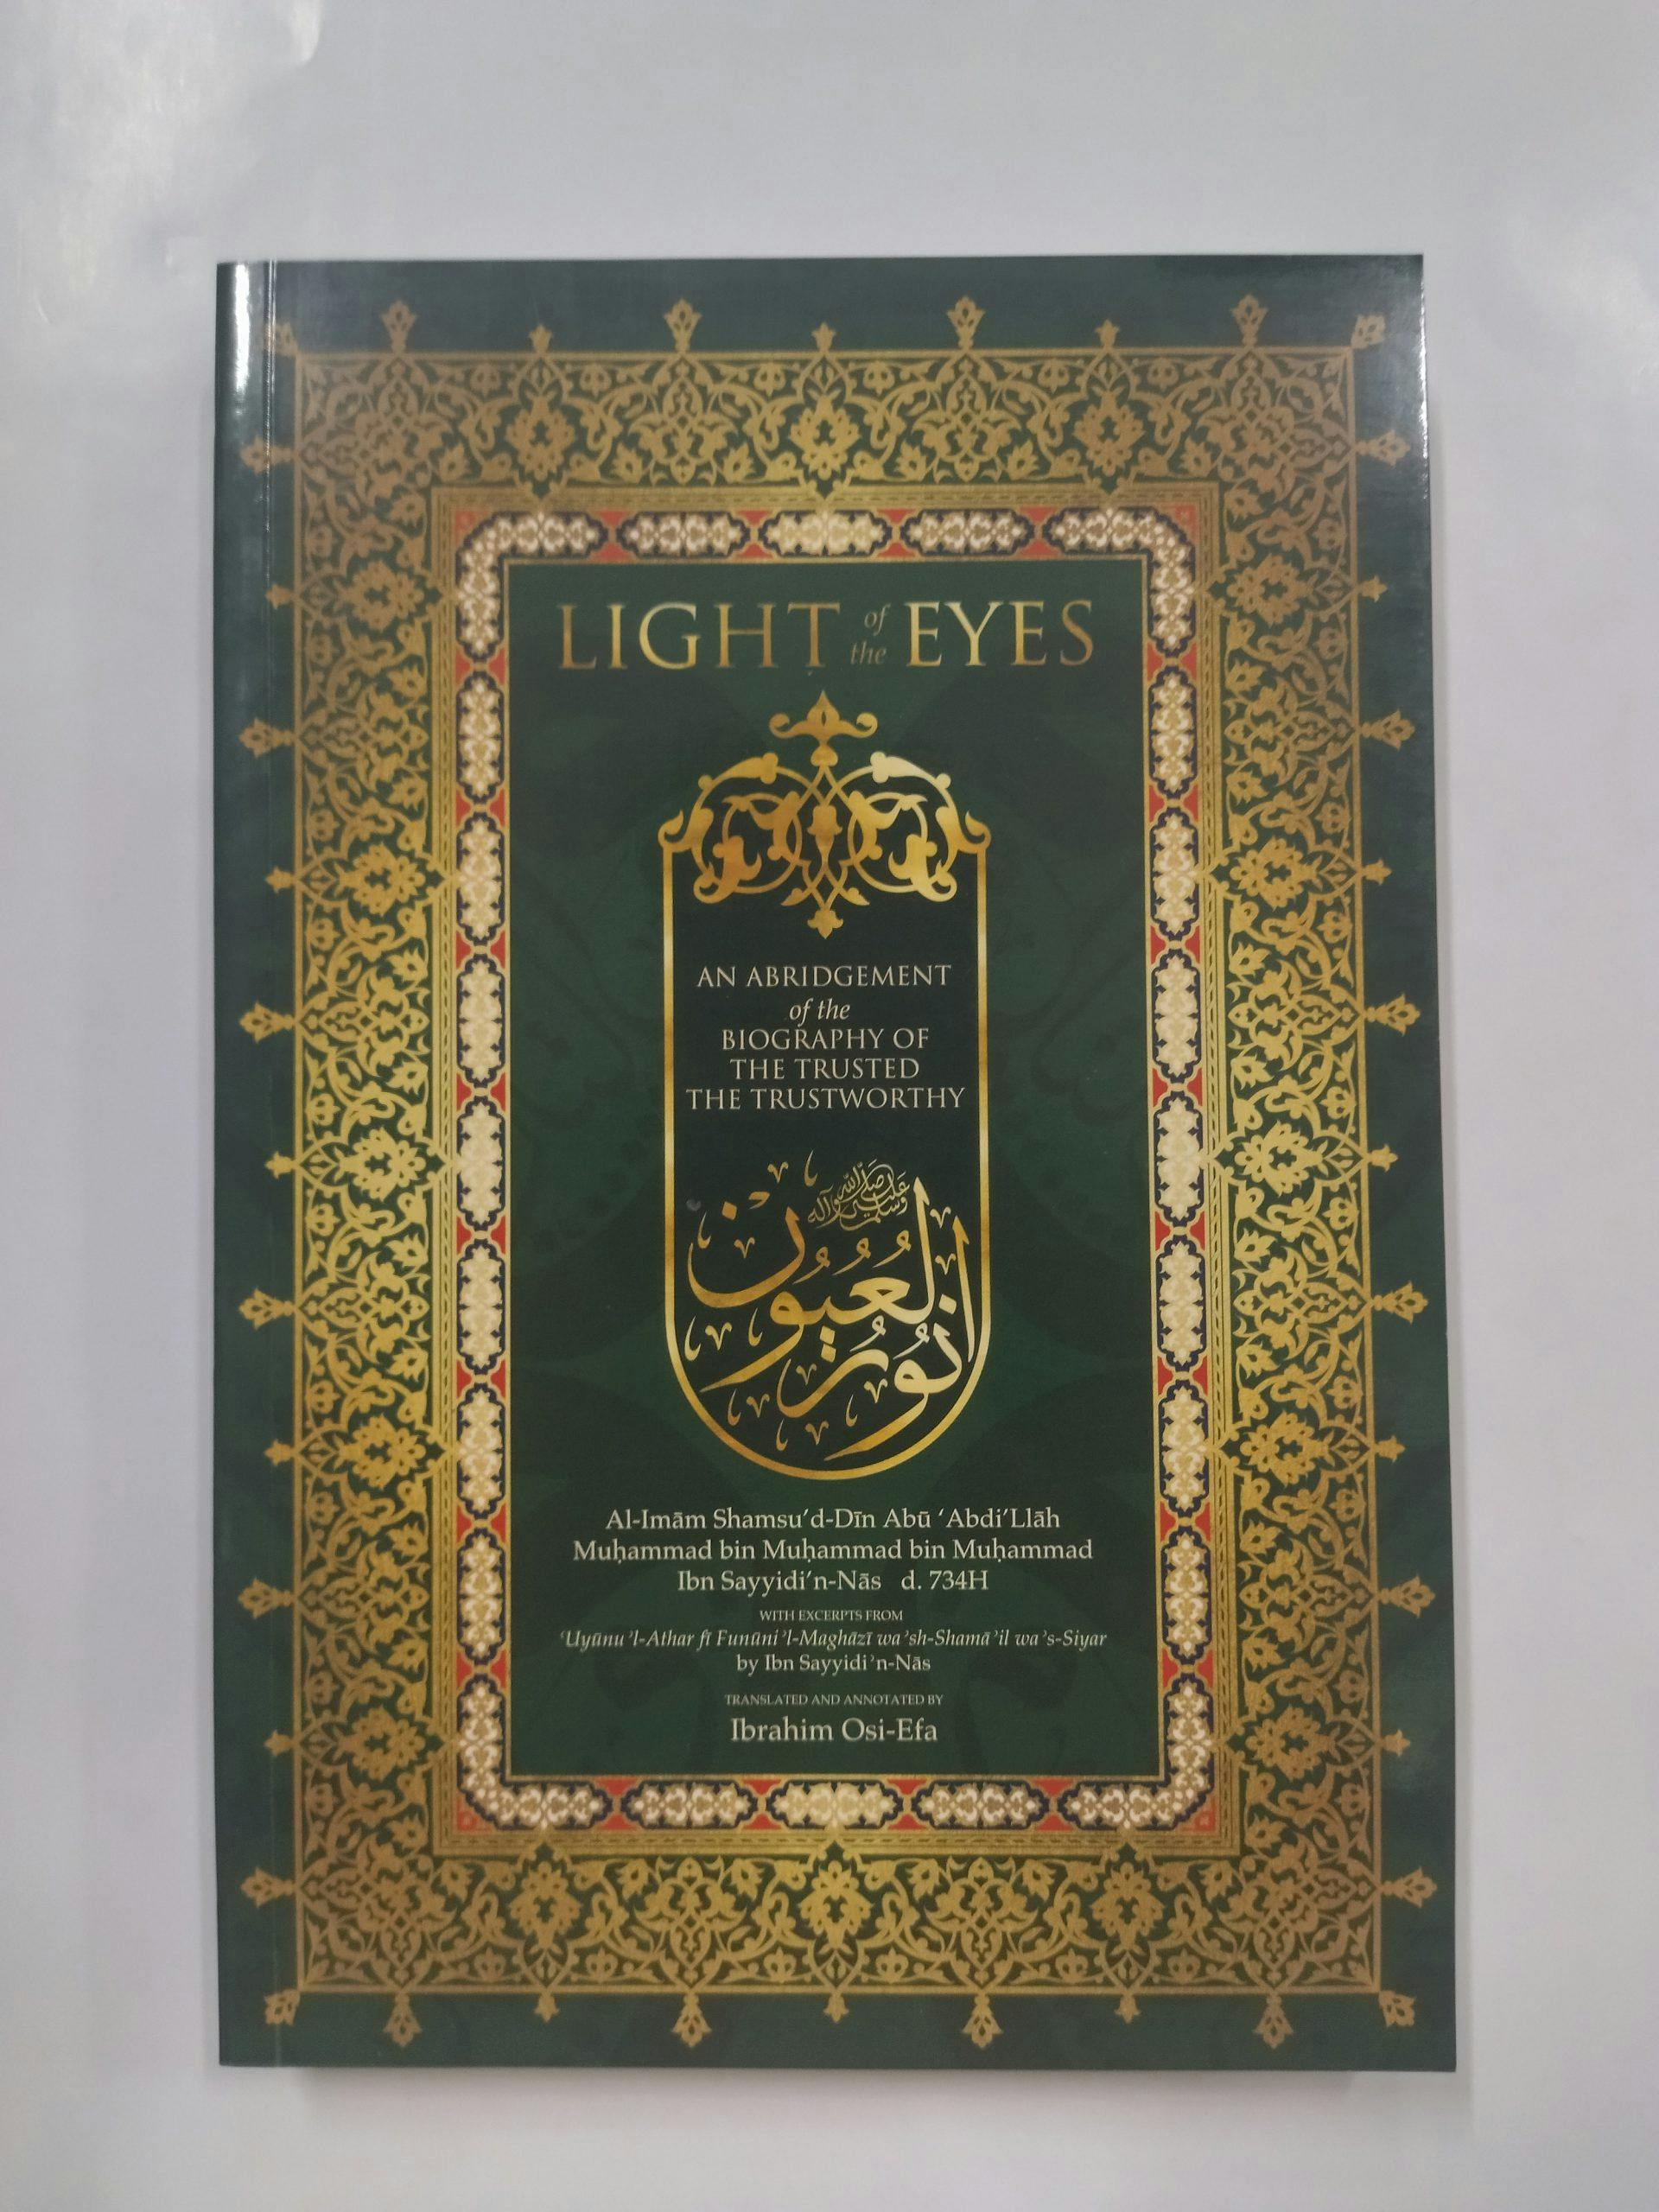 Light of the Eyes: An Abridgement of the Biography of the Trusted, the Trustworthy